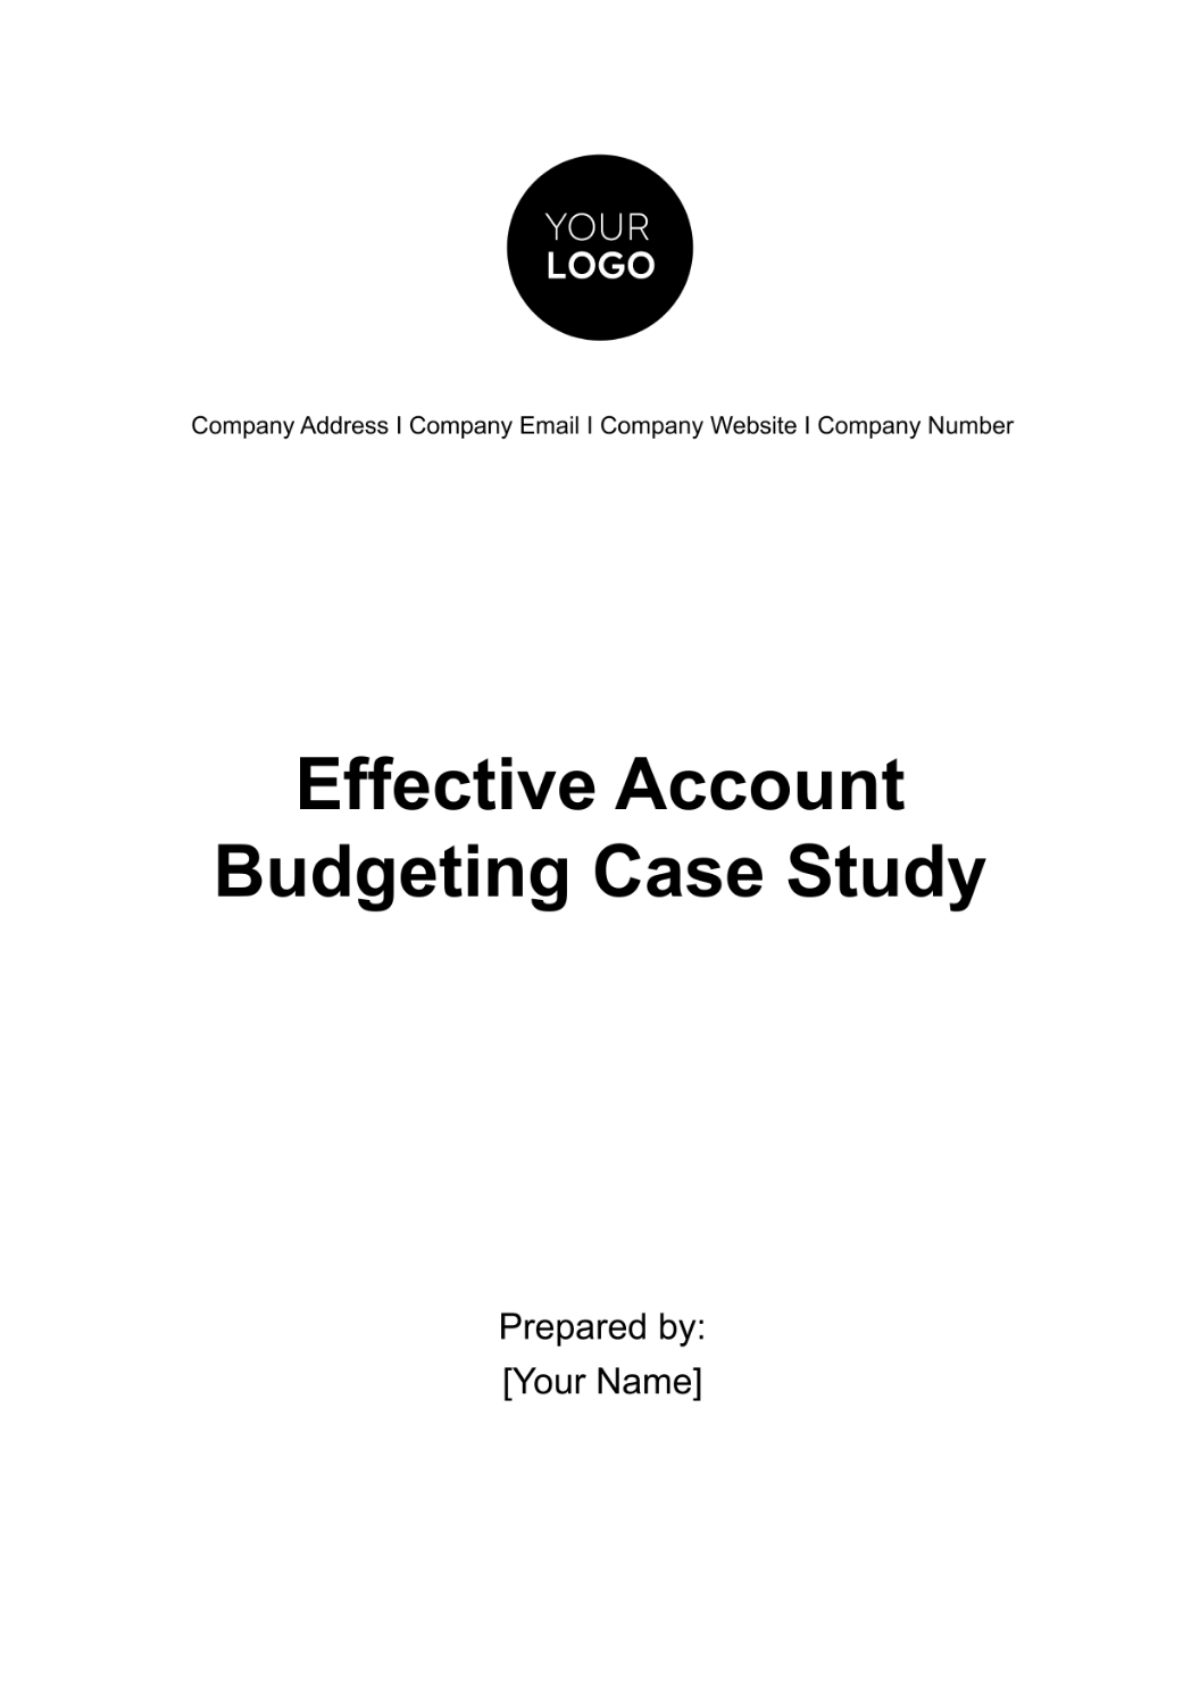 Effective Account Budgeting Case Study Template